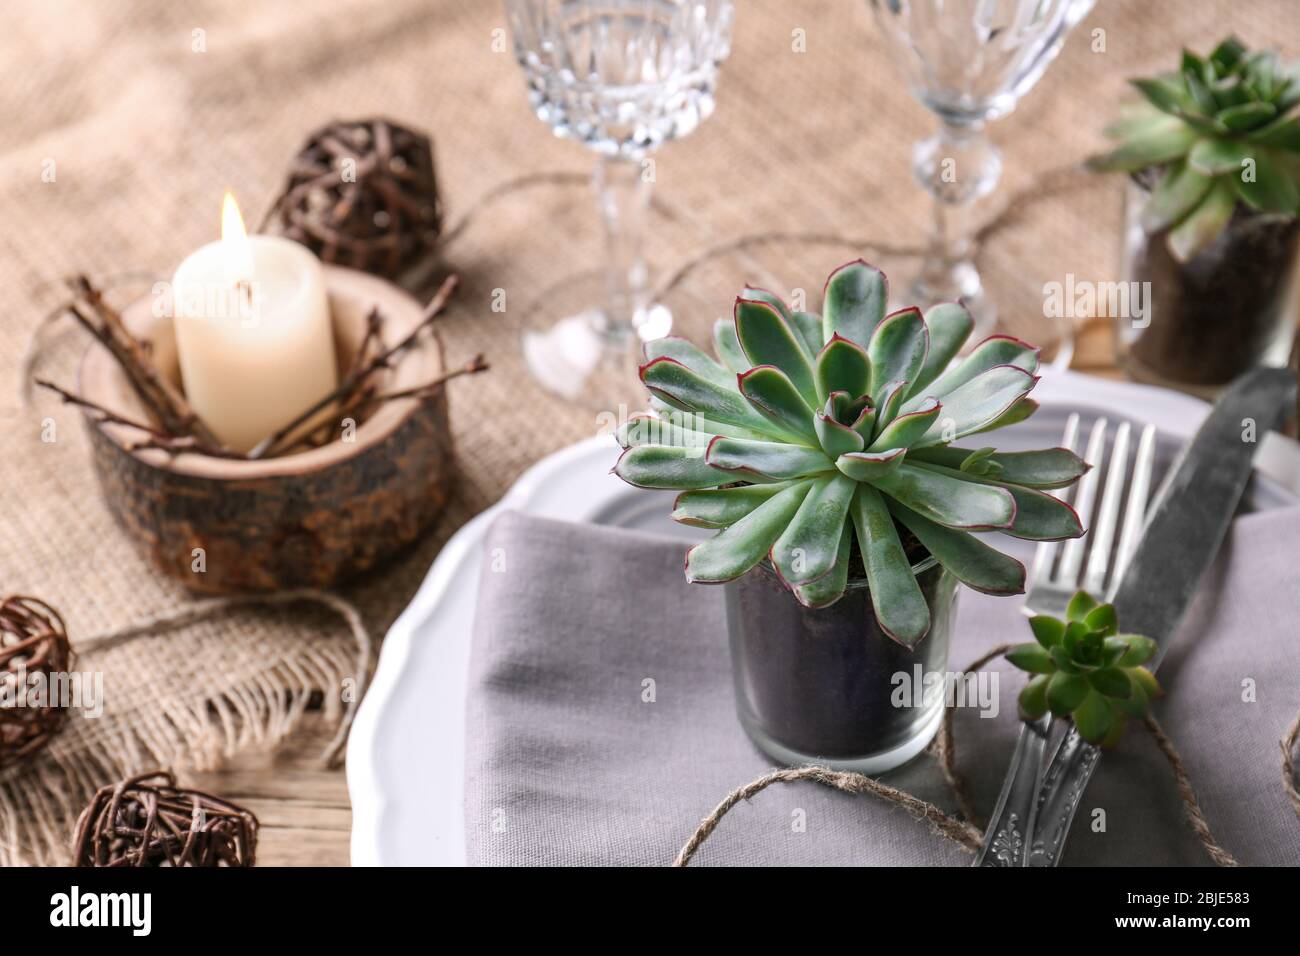 Table served with succulents on plate Stock Photo